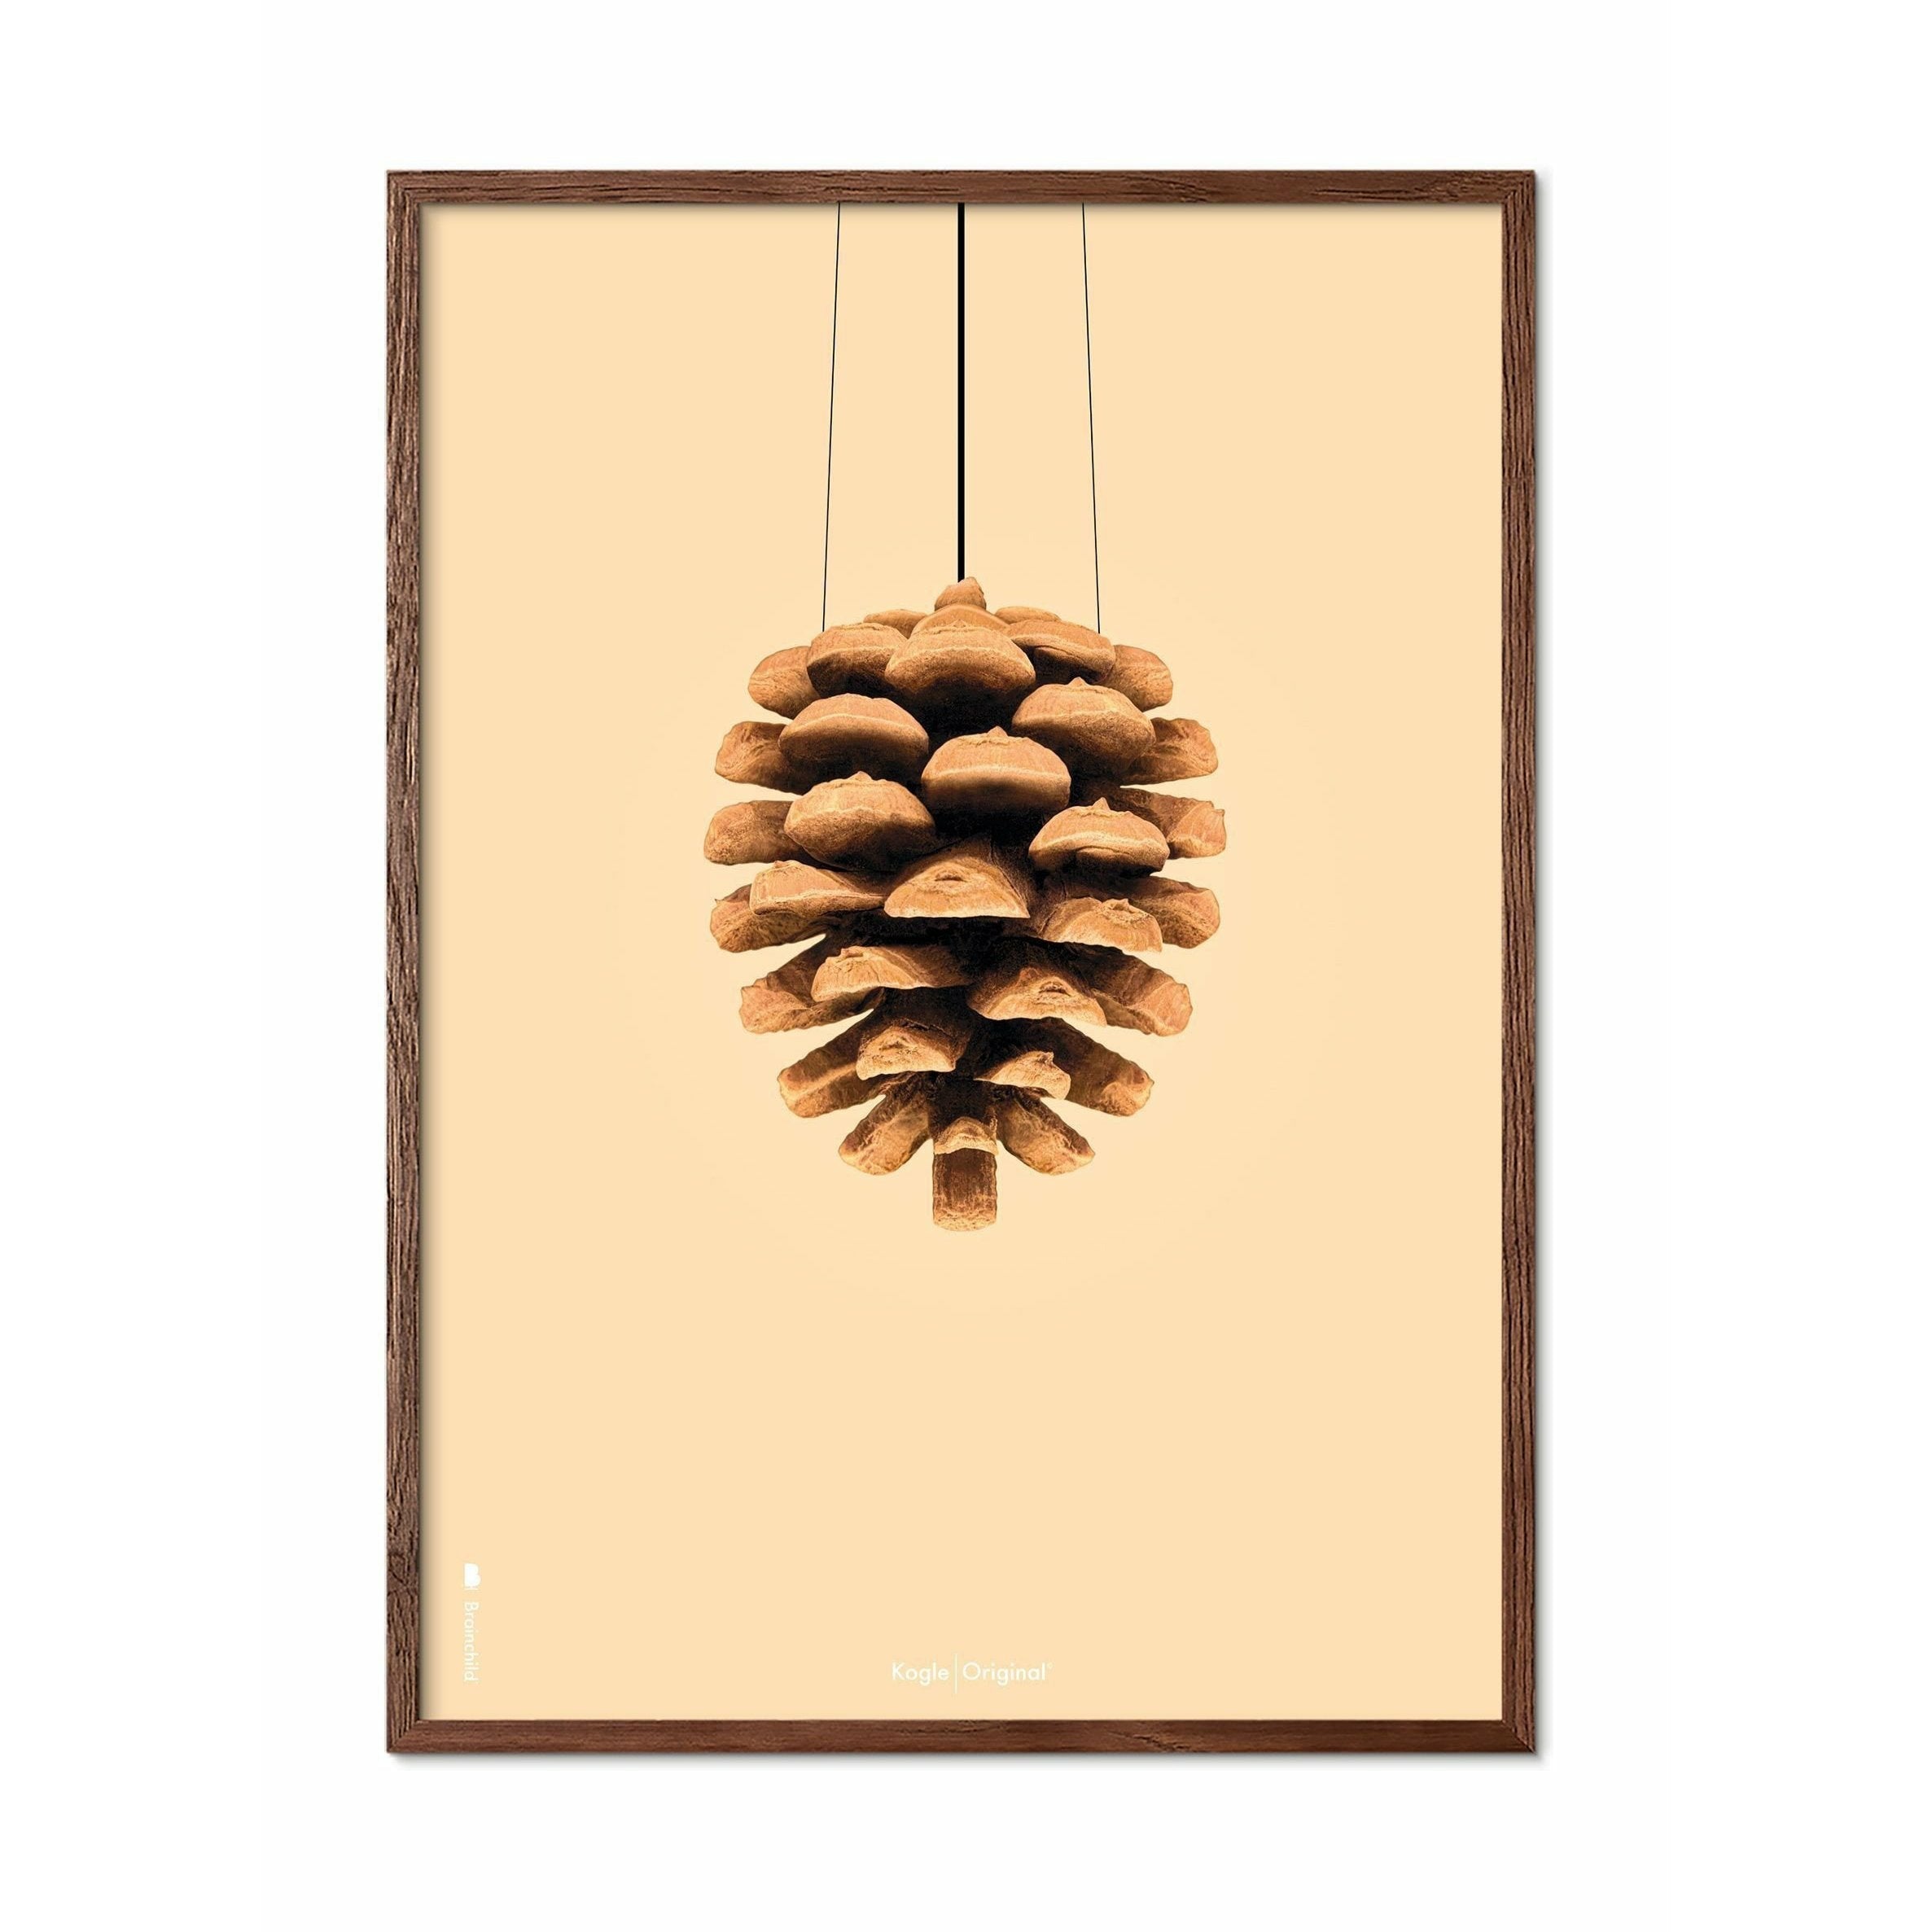 Brainchild Pine Cone Classic Poster, Frame Made Of Dark Wood 50x70 Cm, Sand Colored Background